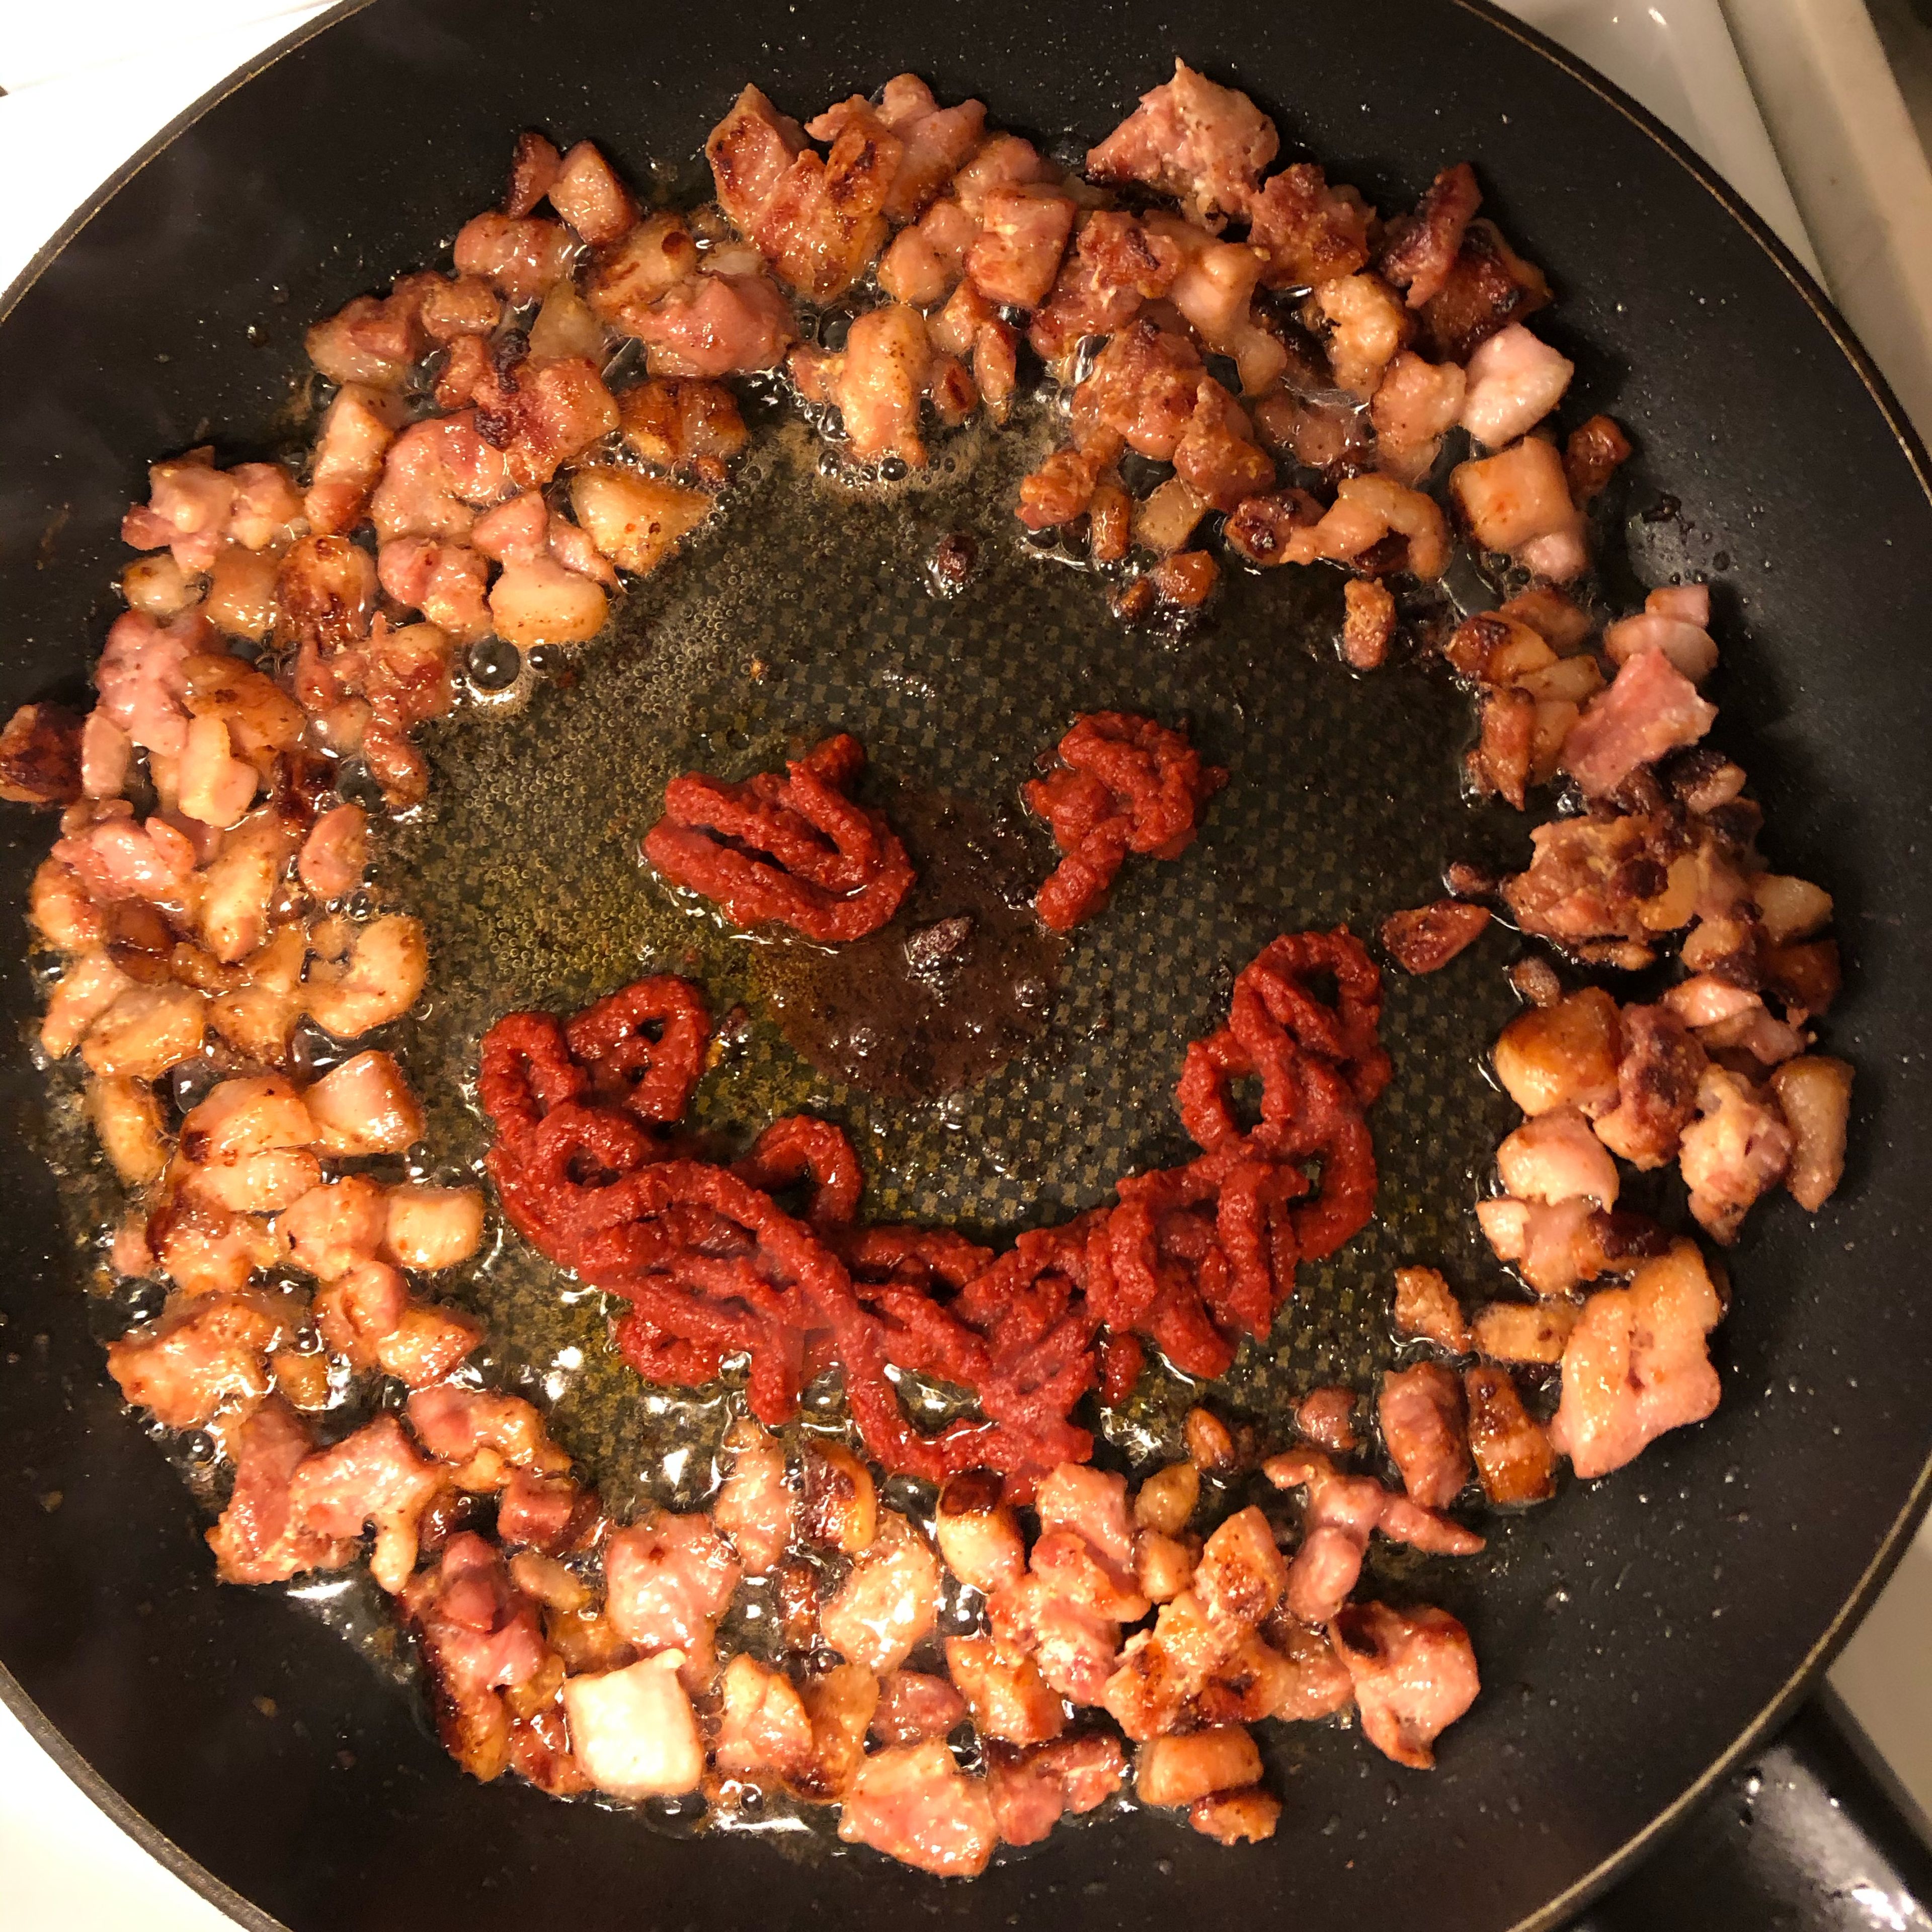 Fry bacon and add tomatoe purée